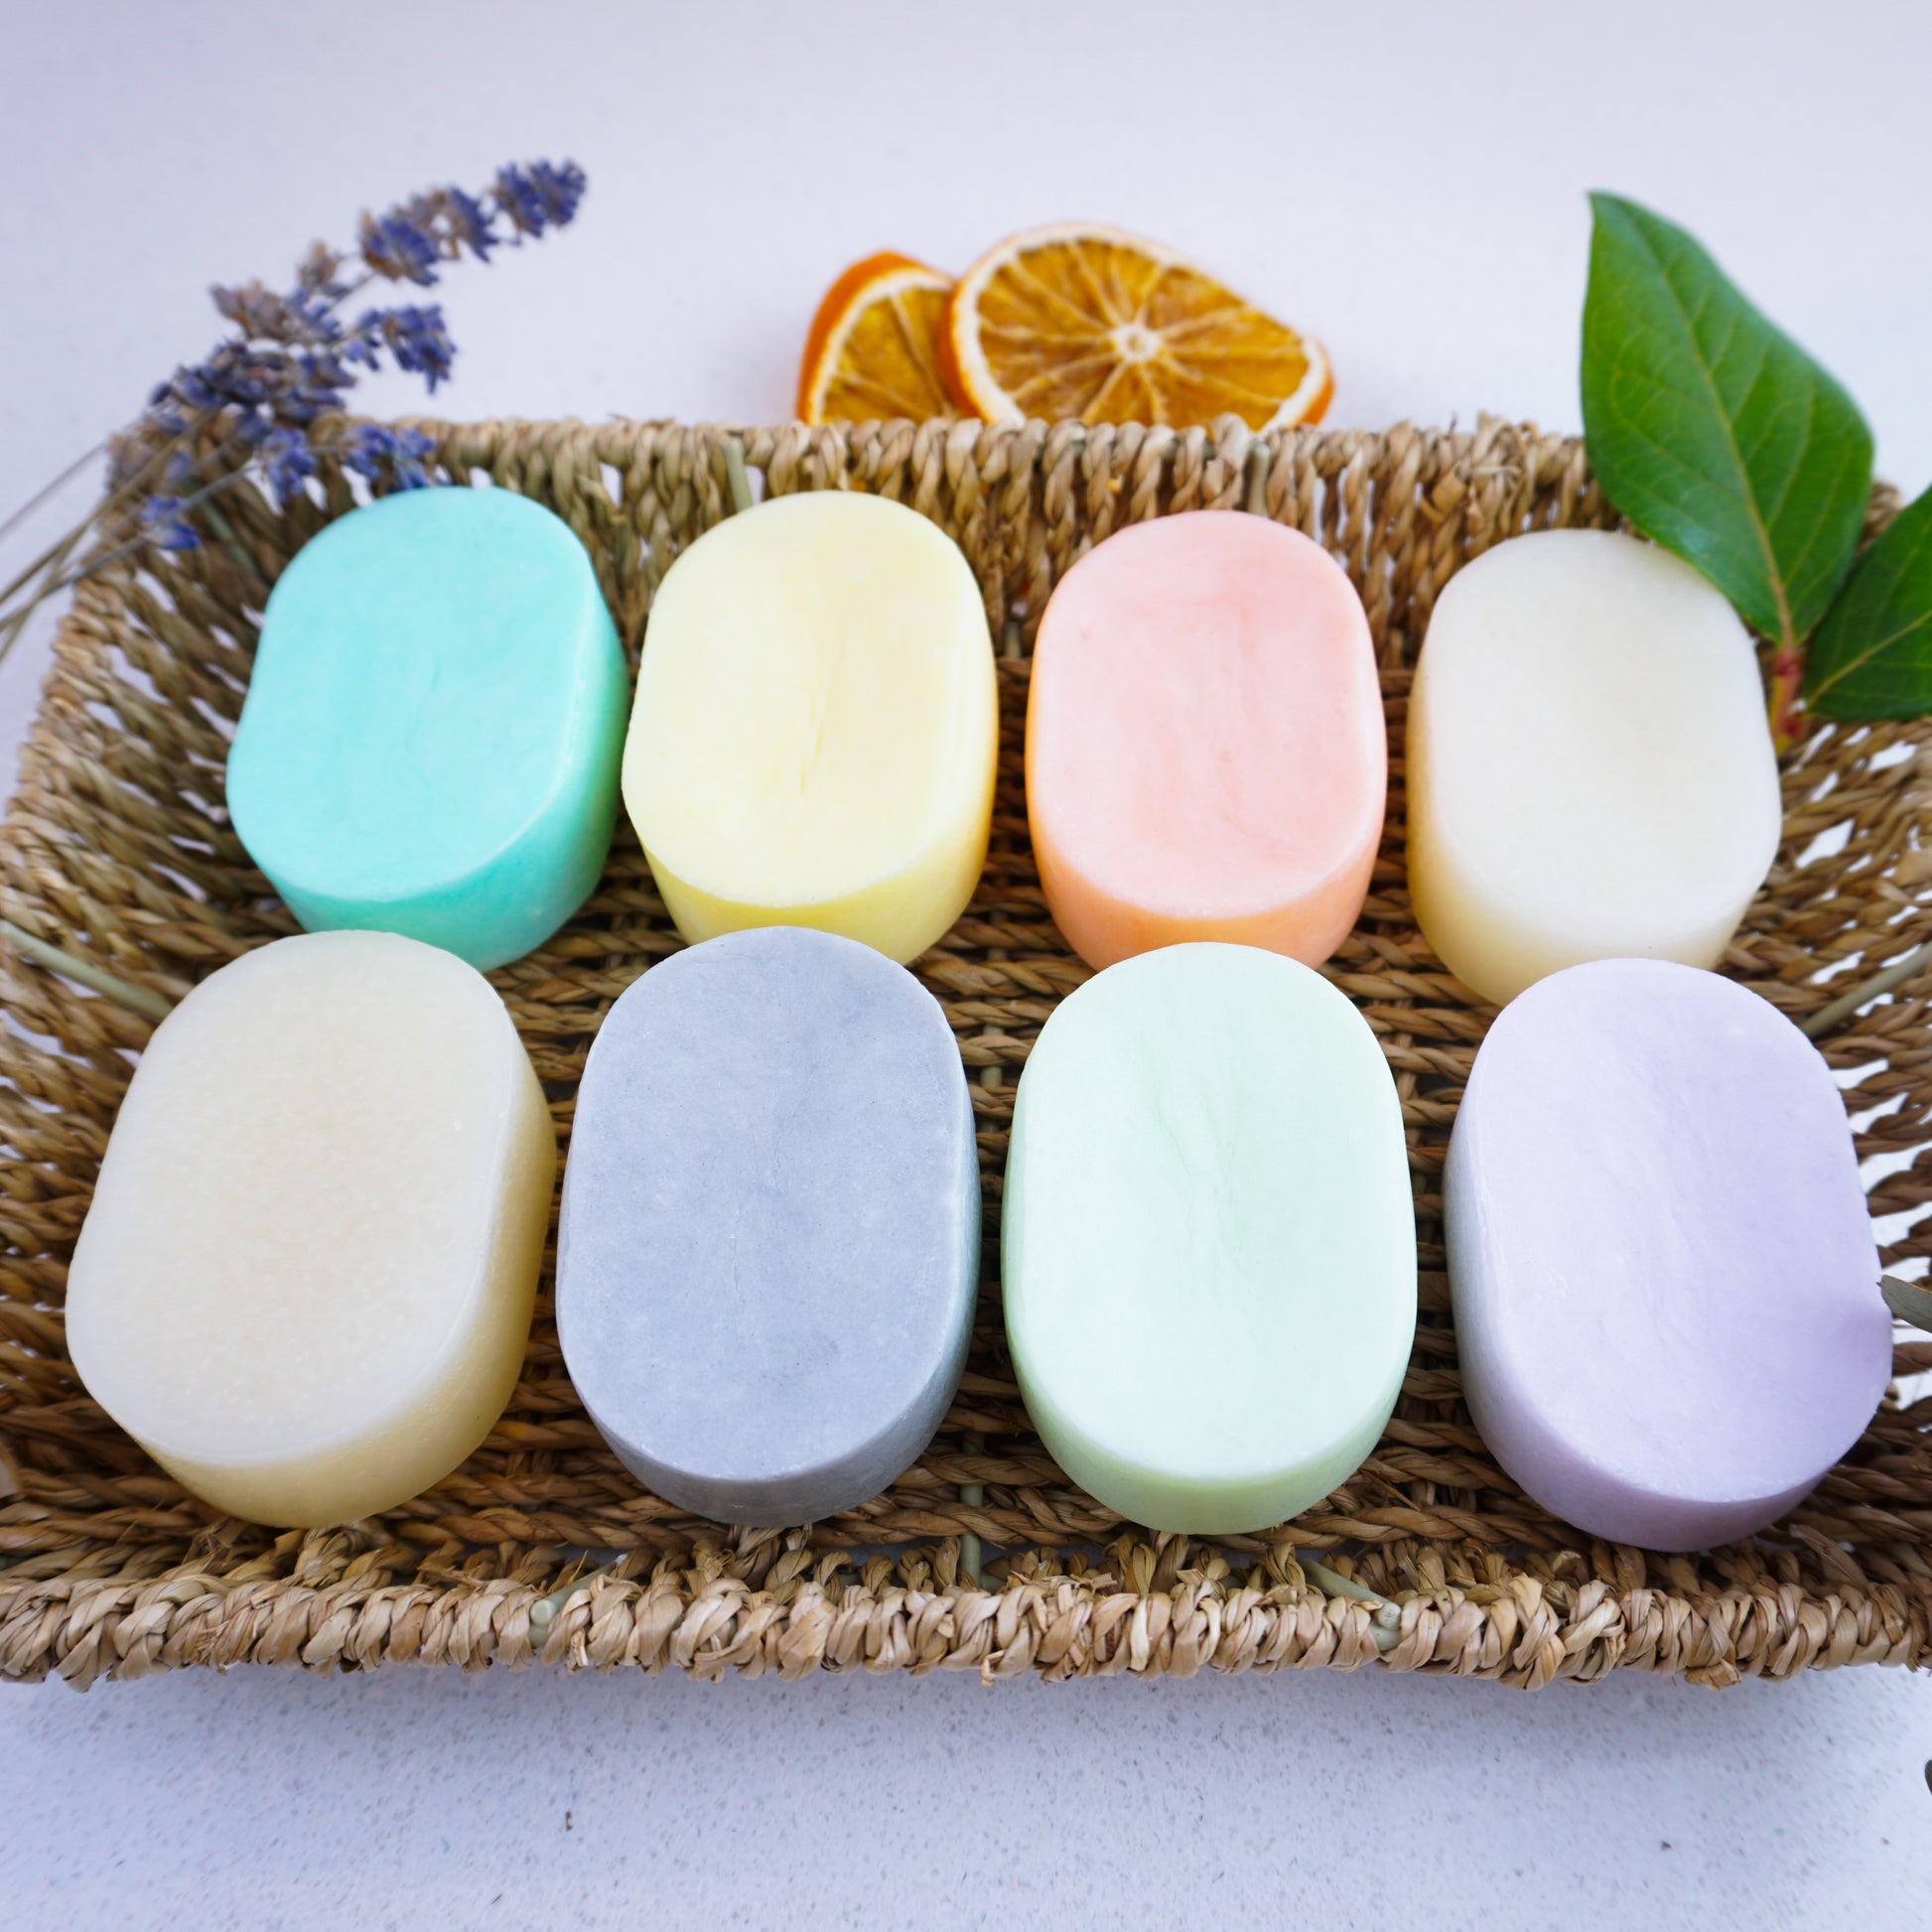 Unwrapped shampoo and conditioner bars by Washla